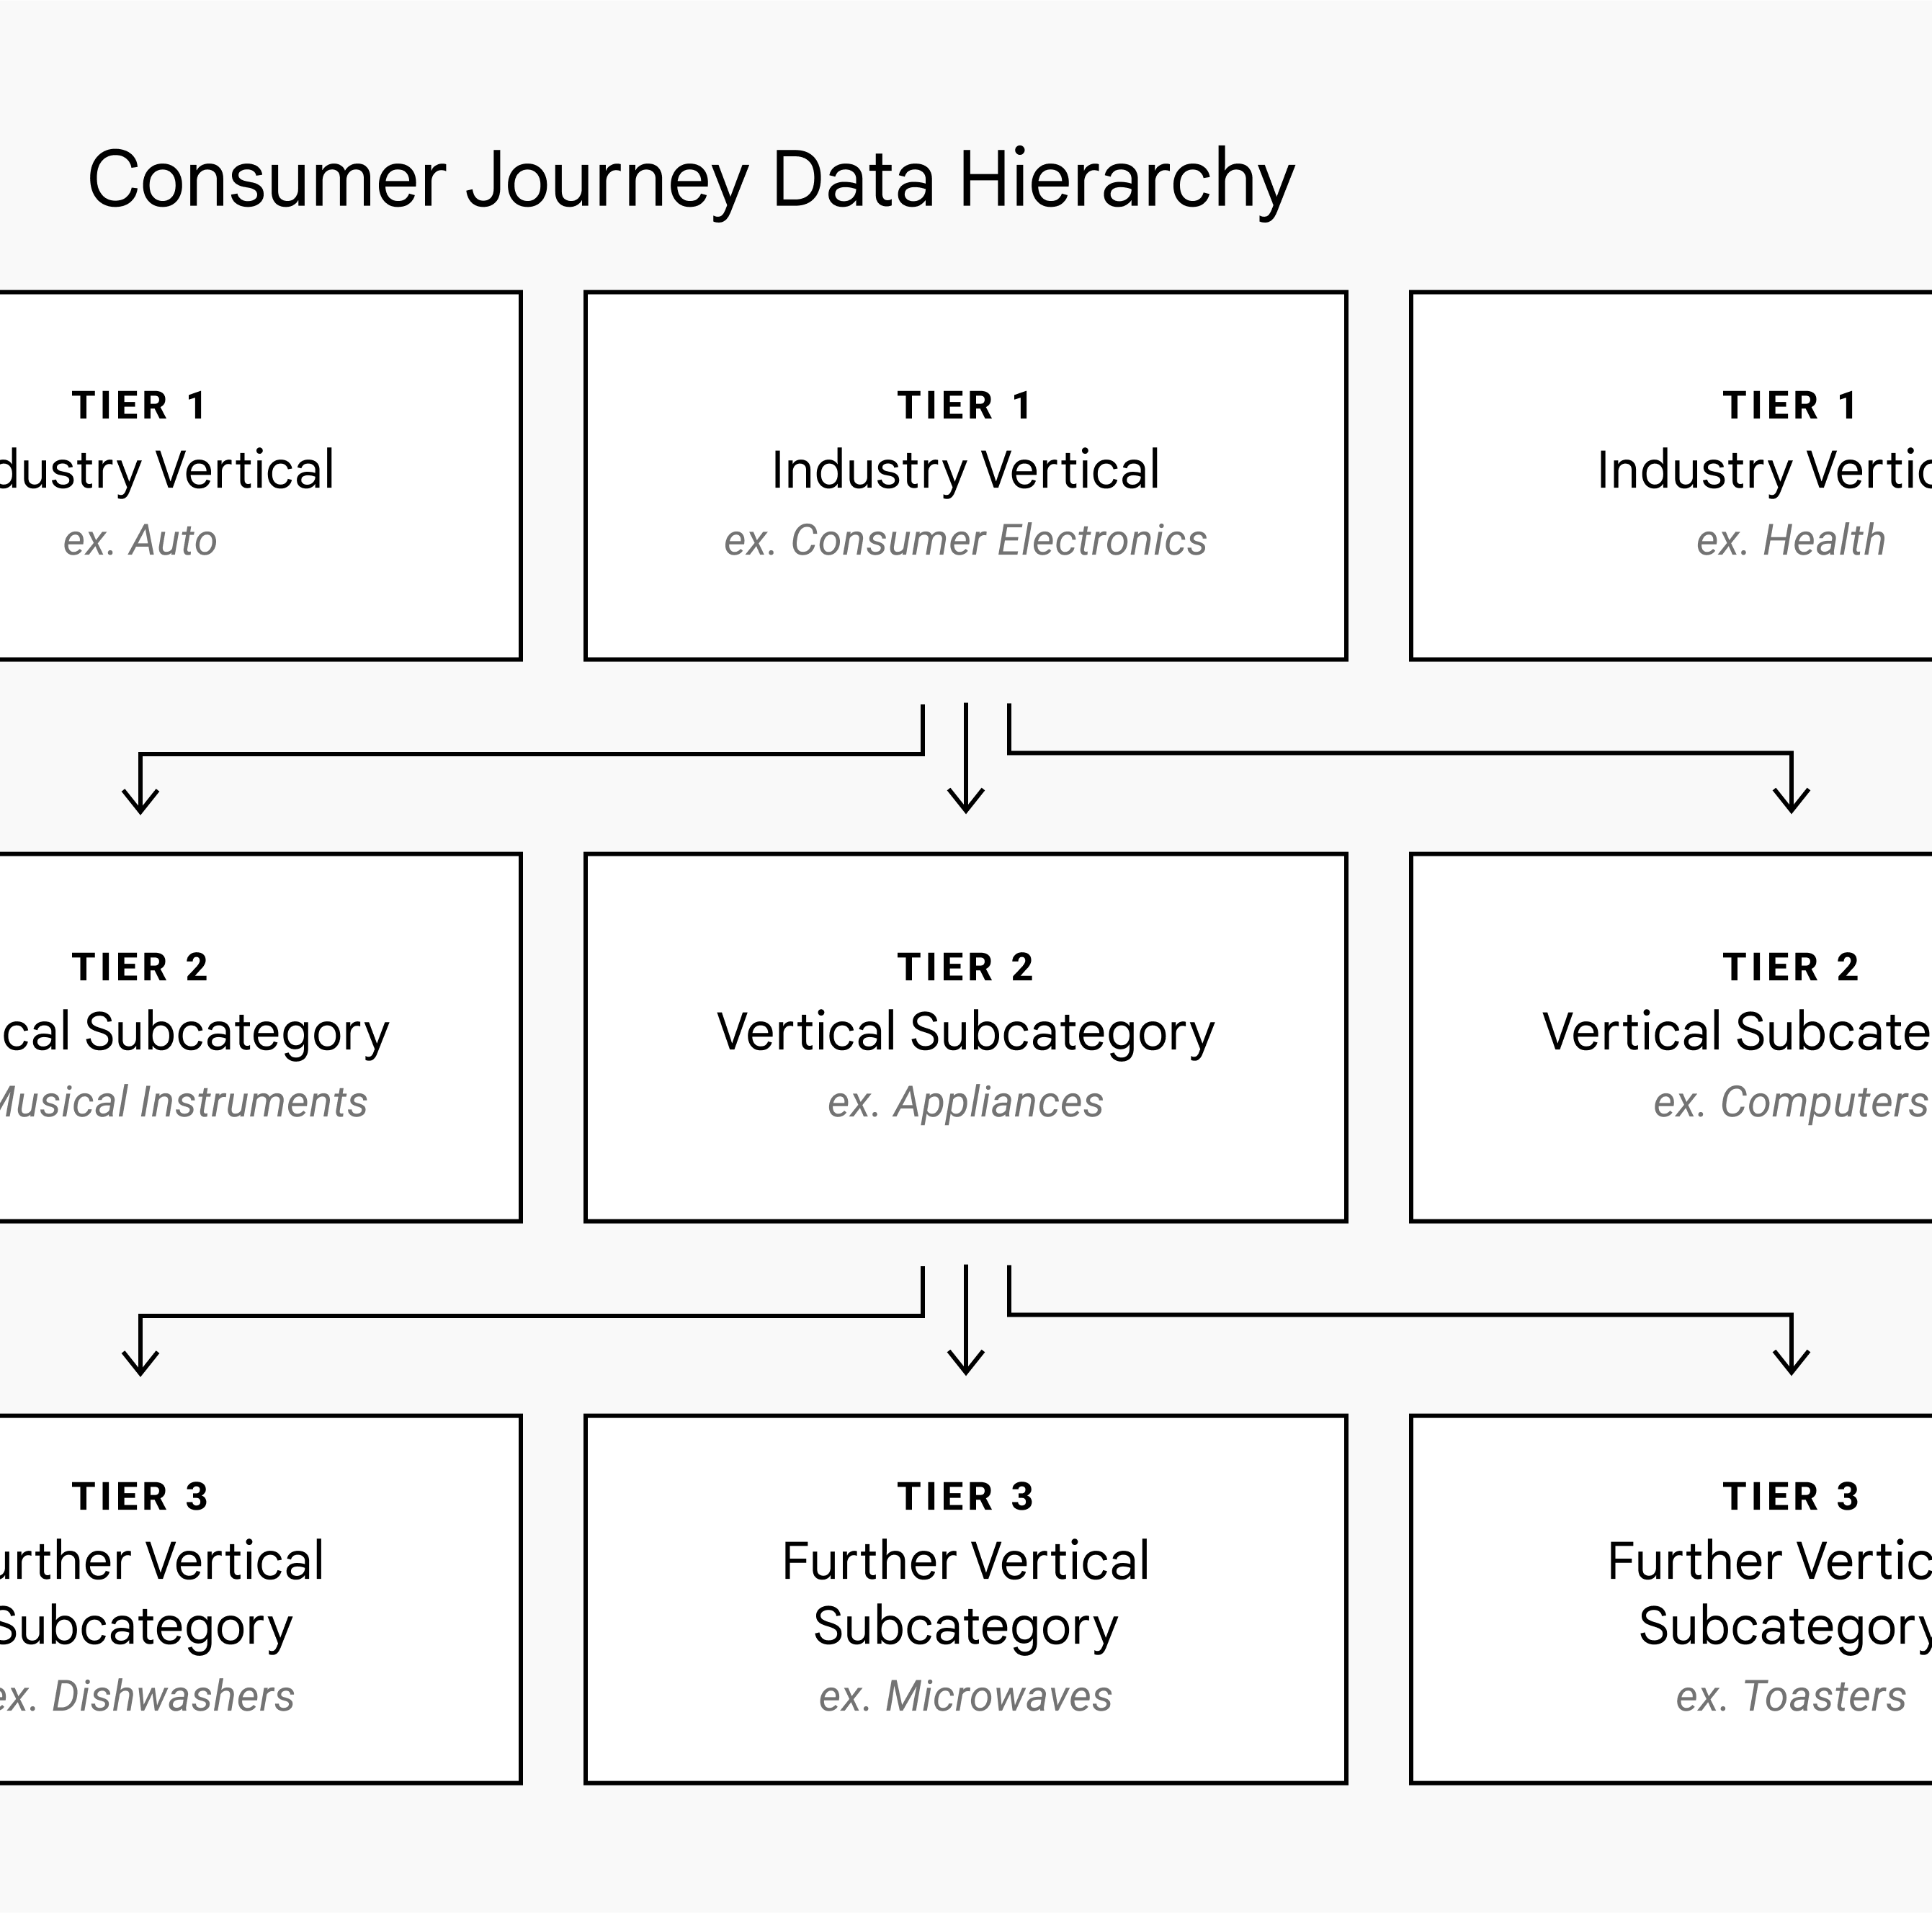 The customer journey data was organized by industry vertical. These industry verticals broke down into vertical subcategories, and again into further subcategories.